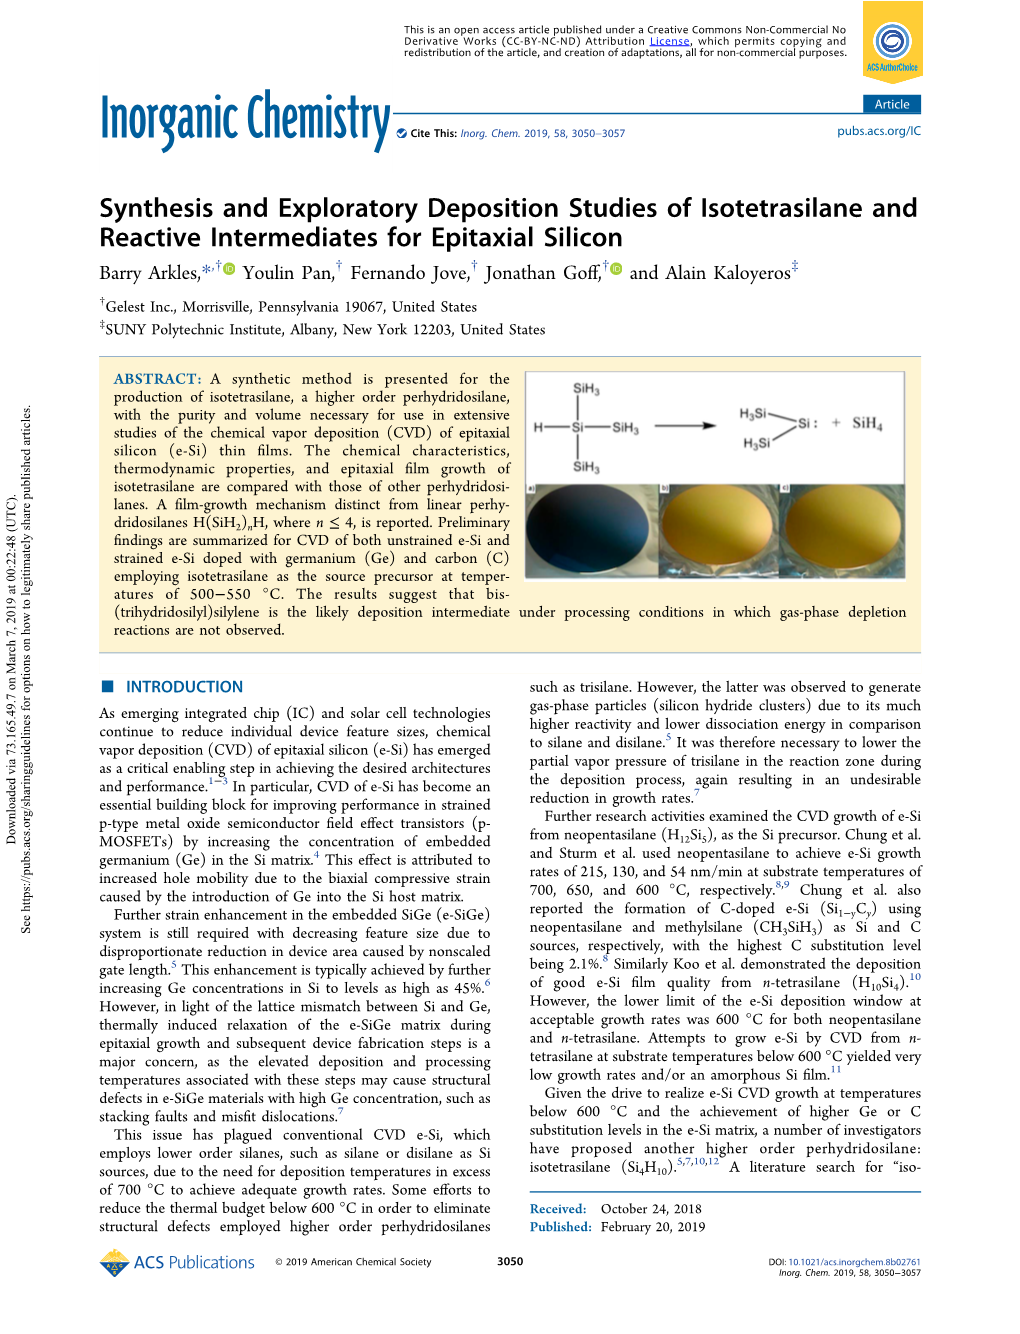 Synthesis and Exploratory Deposition Studies of Isotetrasilane and Reactive Intermediates for Epitaxial Silicon